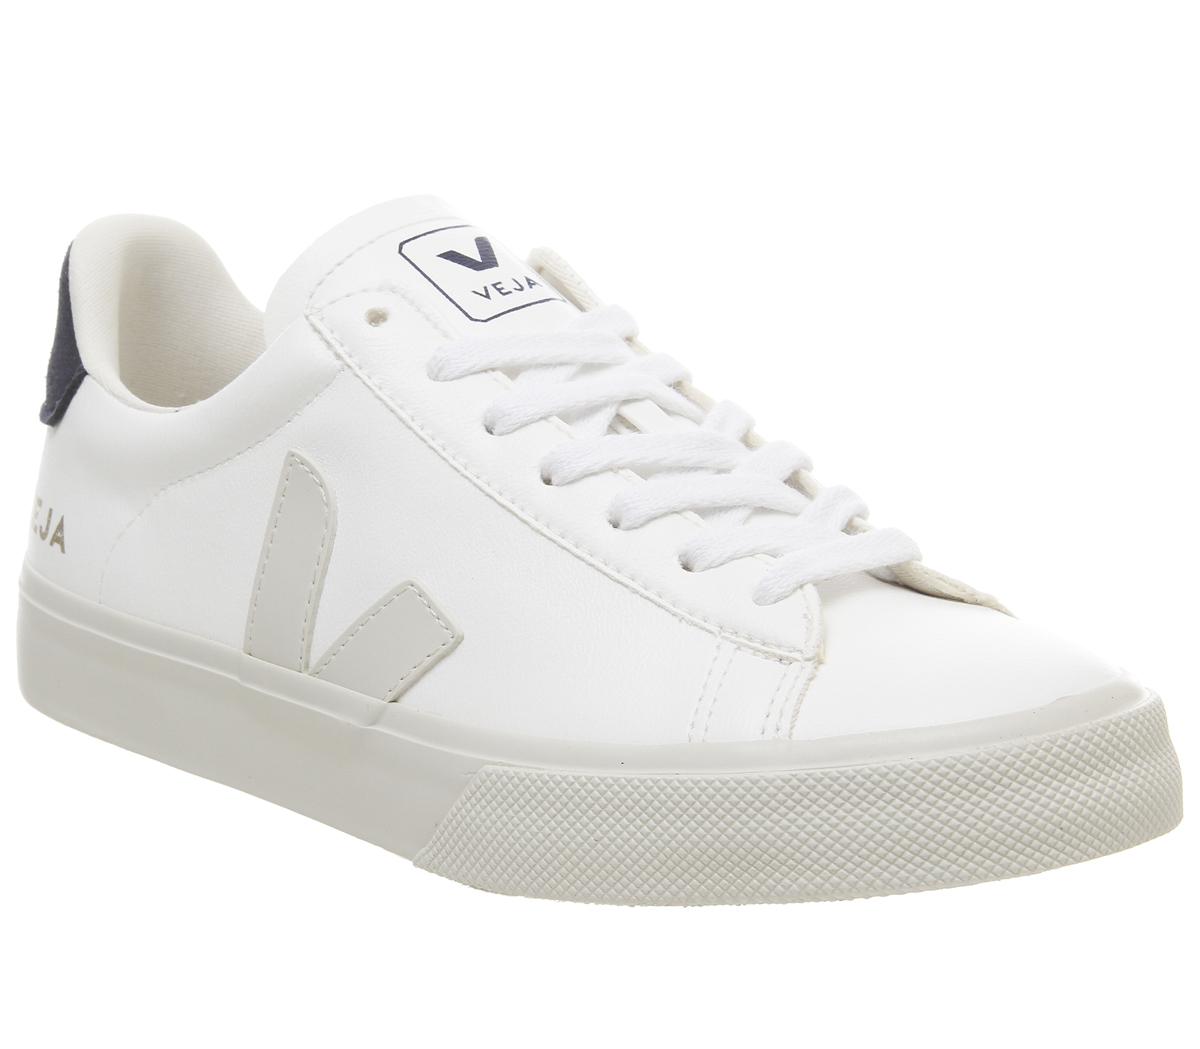 Veja Campo Trainers White Navy - His 